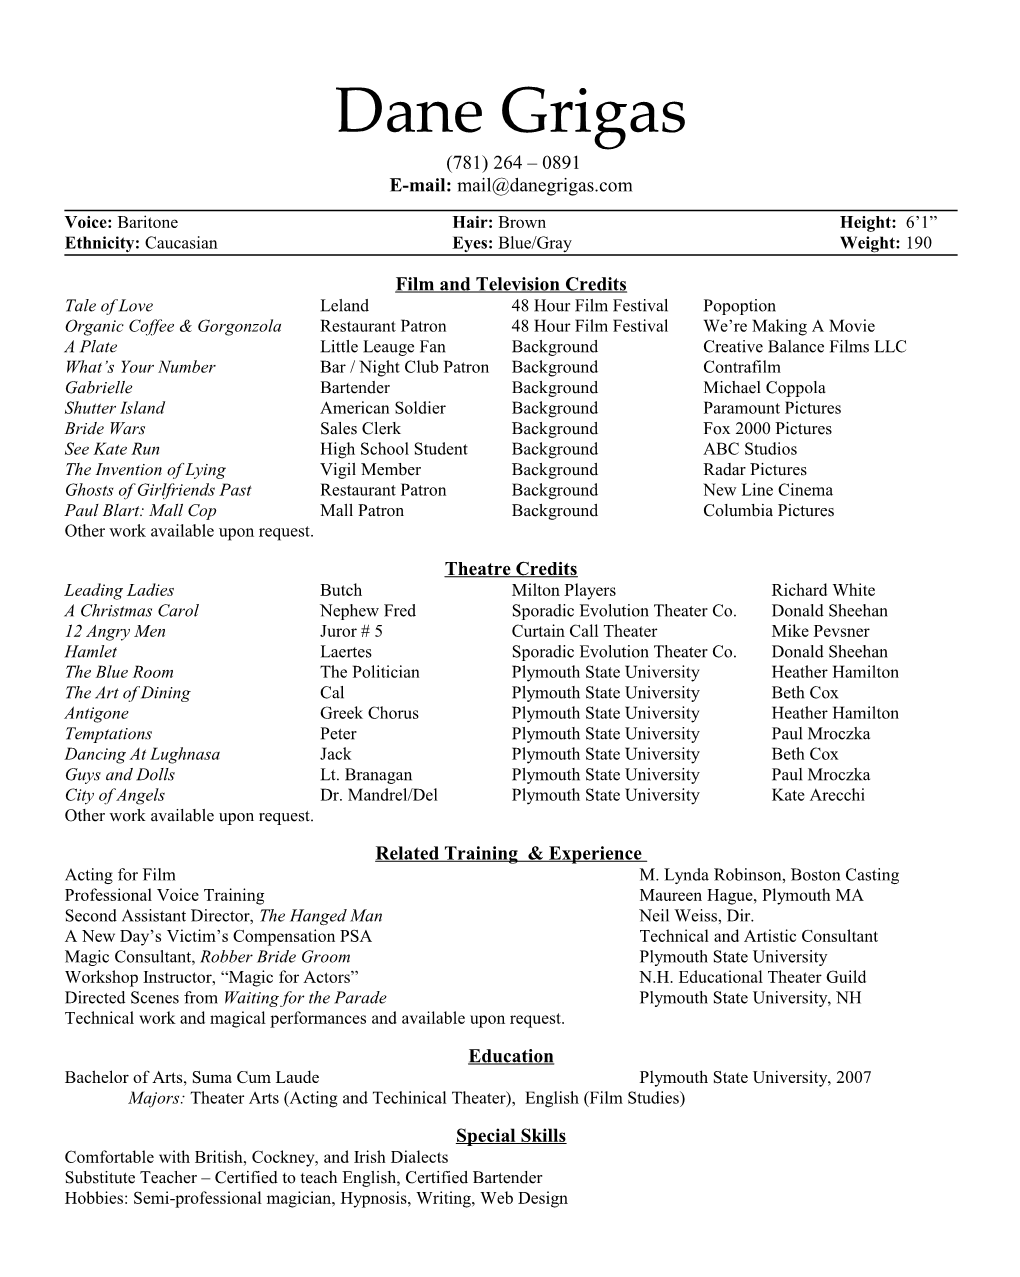 Theater and Film Credits